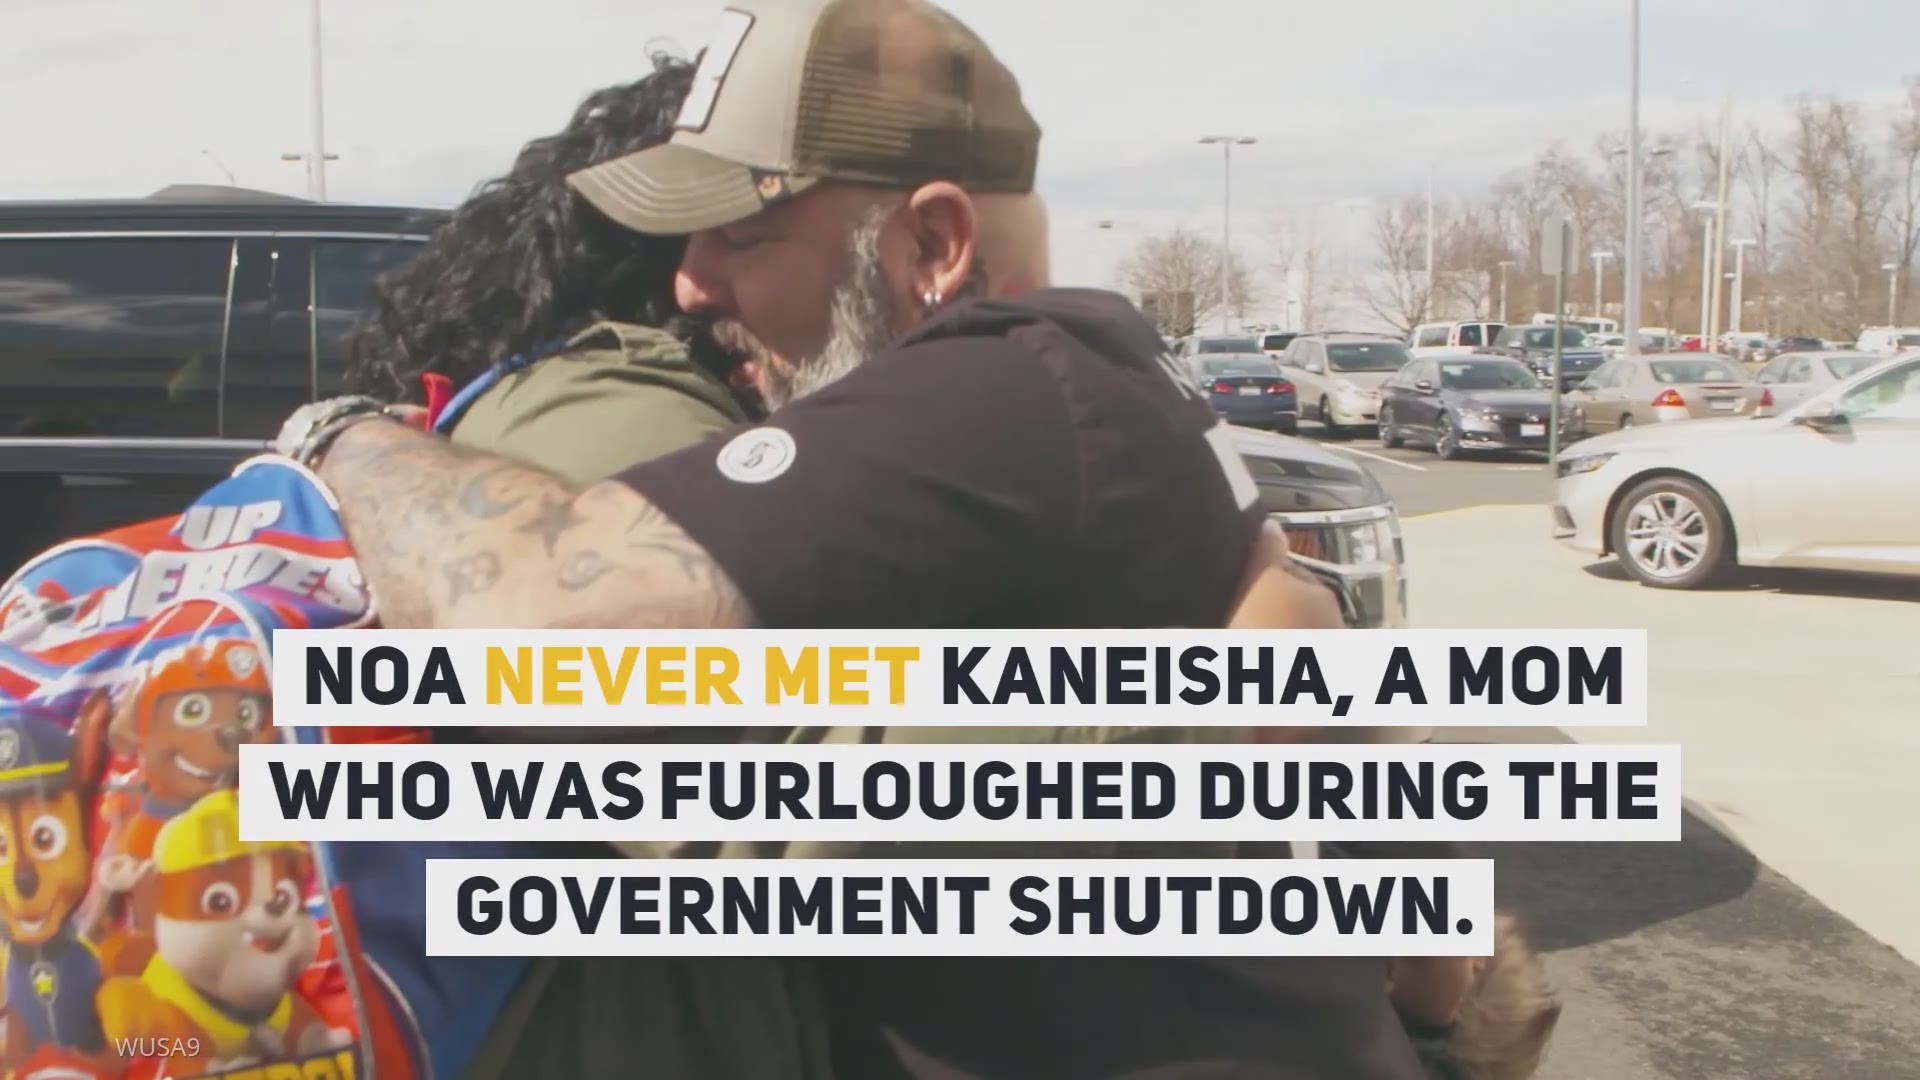 Here’s how dozens of strangers came to the aid of a furloughed single mother who faced a mountain of hardships.